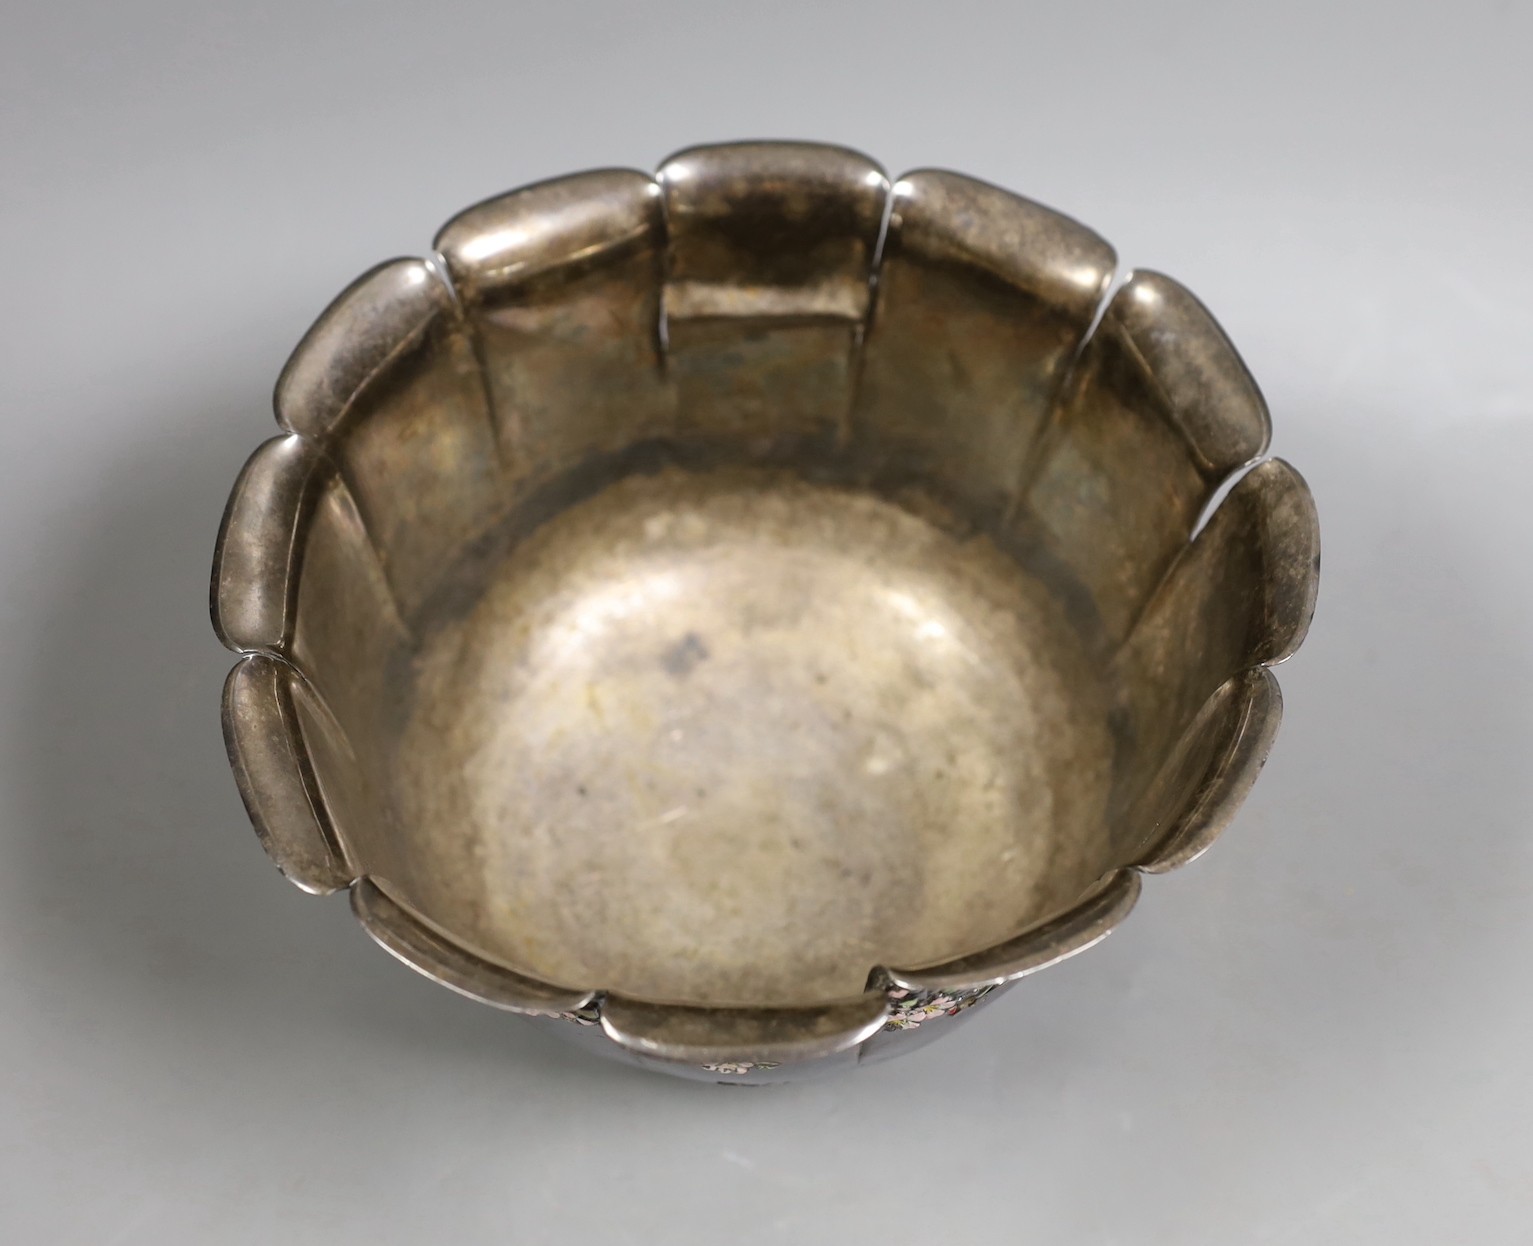 An early 20th century Japanese white metal fruit bowl with applied enamelled foliate decoration(a.f.) diameter 18.9cm, gross 14.2oz.